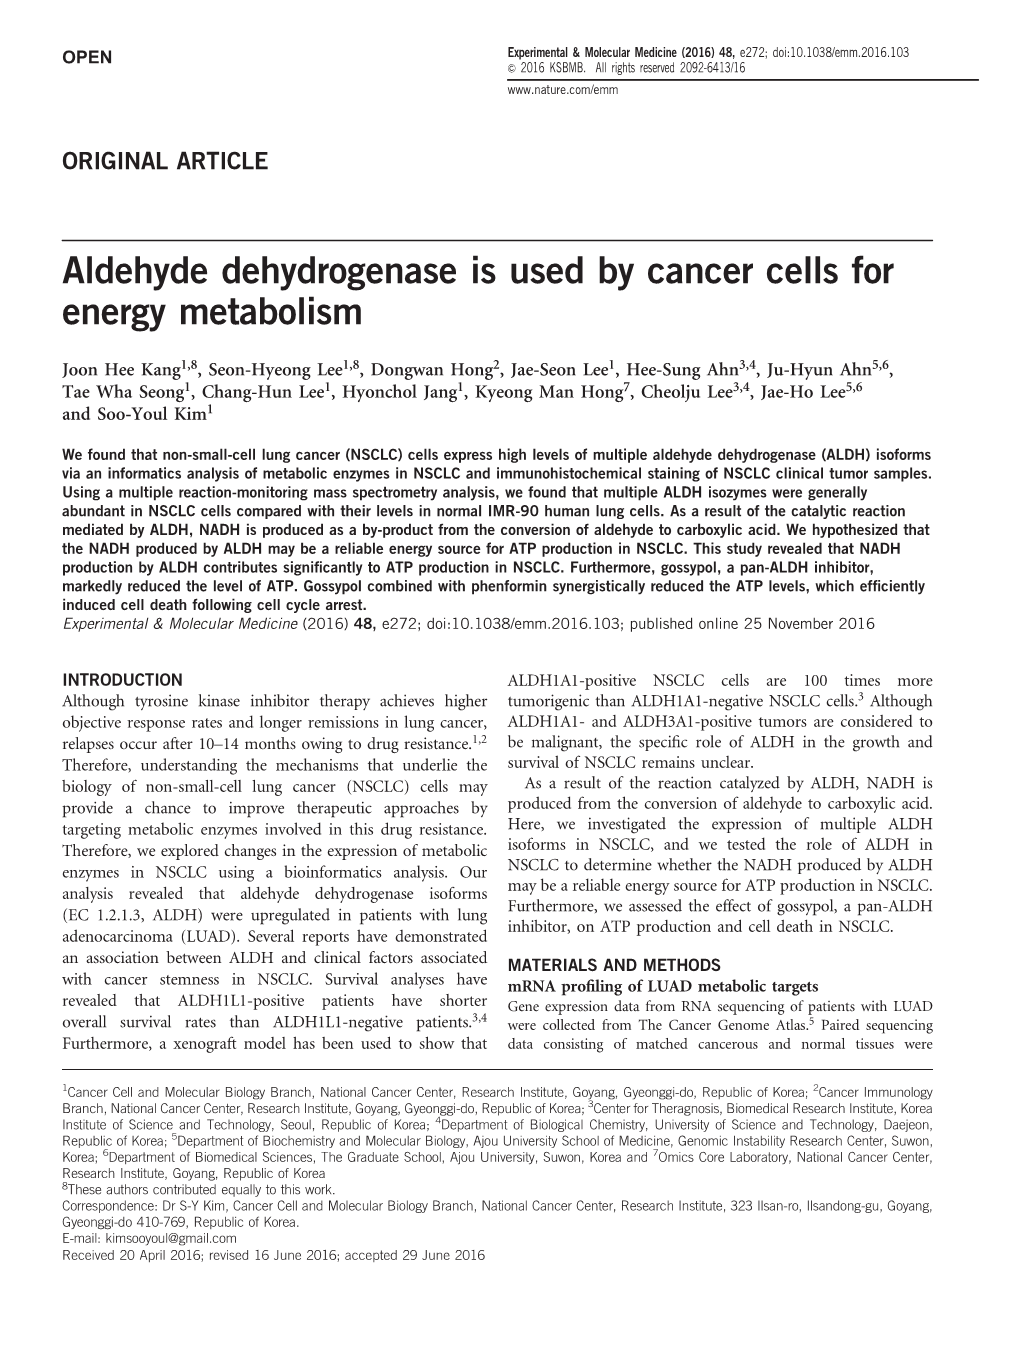 Aldehyde Dehydrogenase Is Used by Cancer Cells for Energy Metabolism